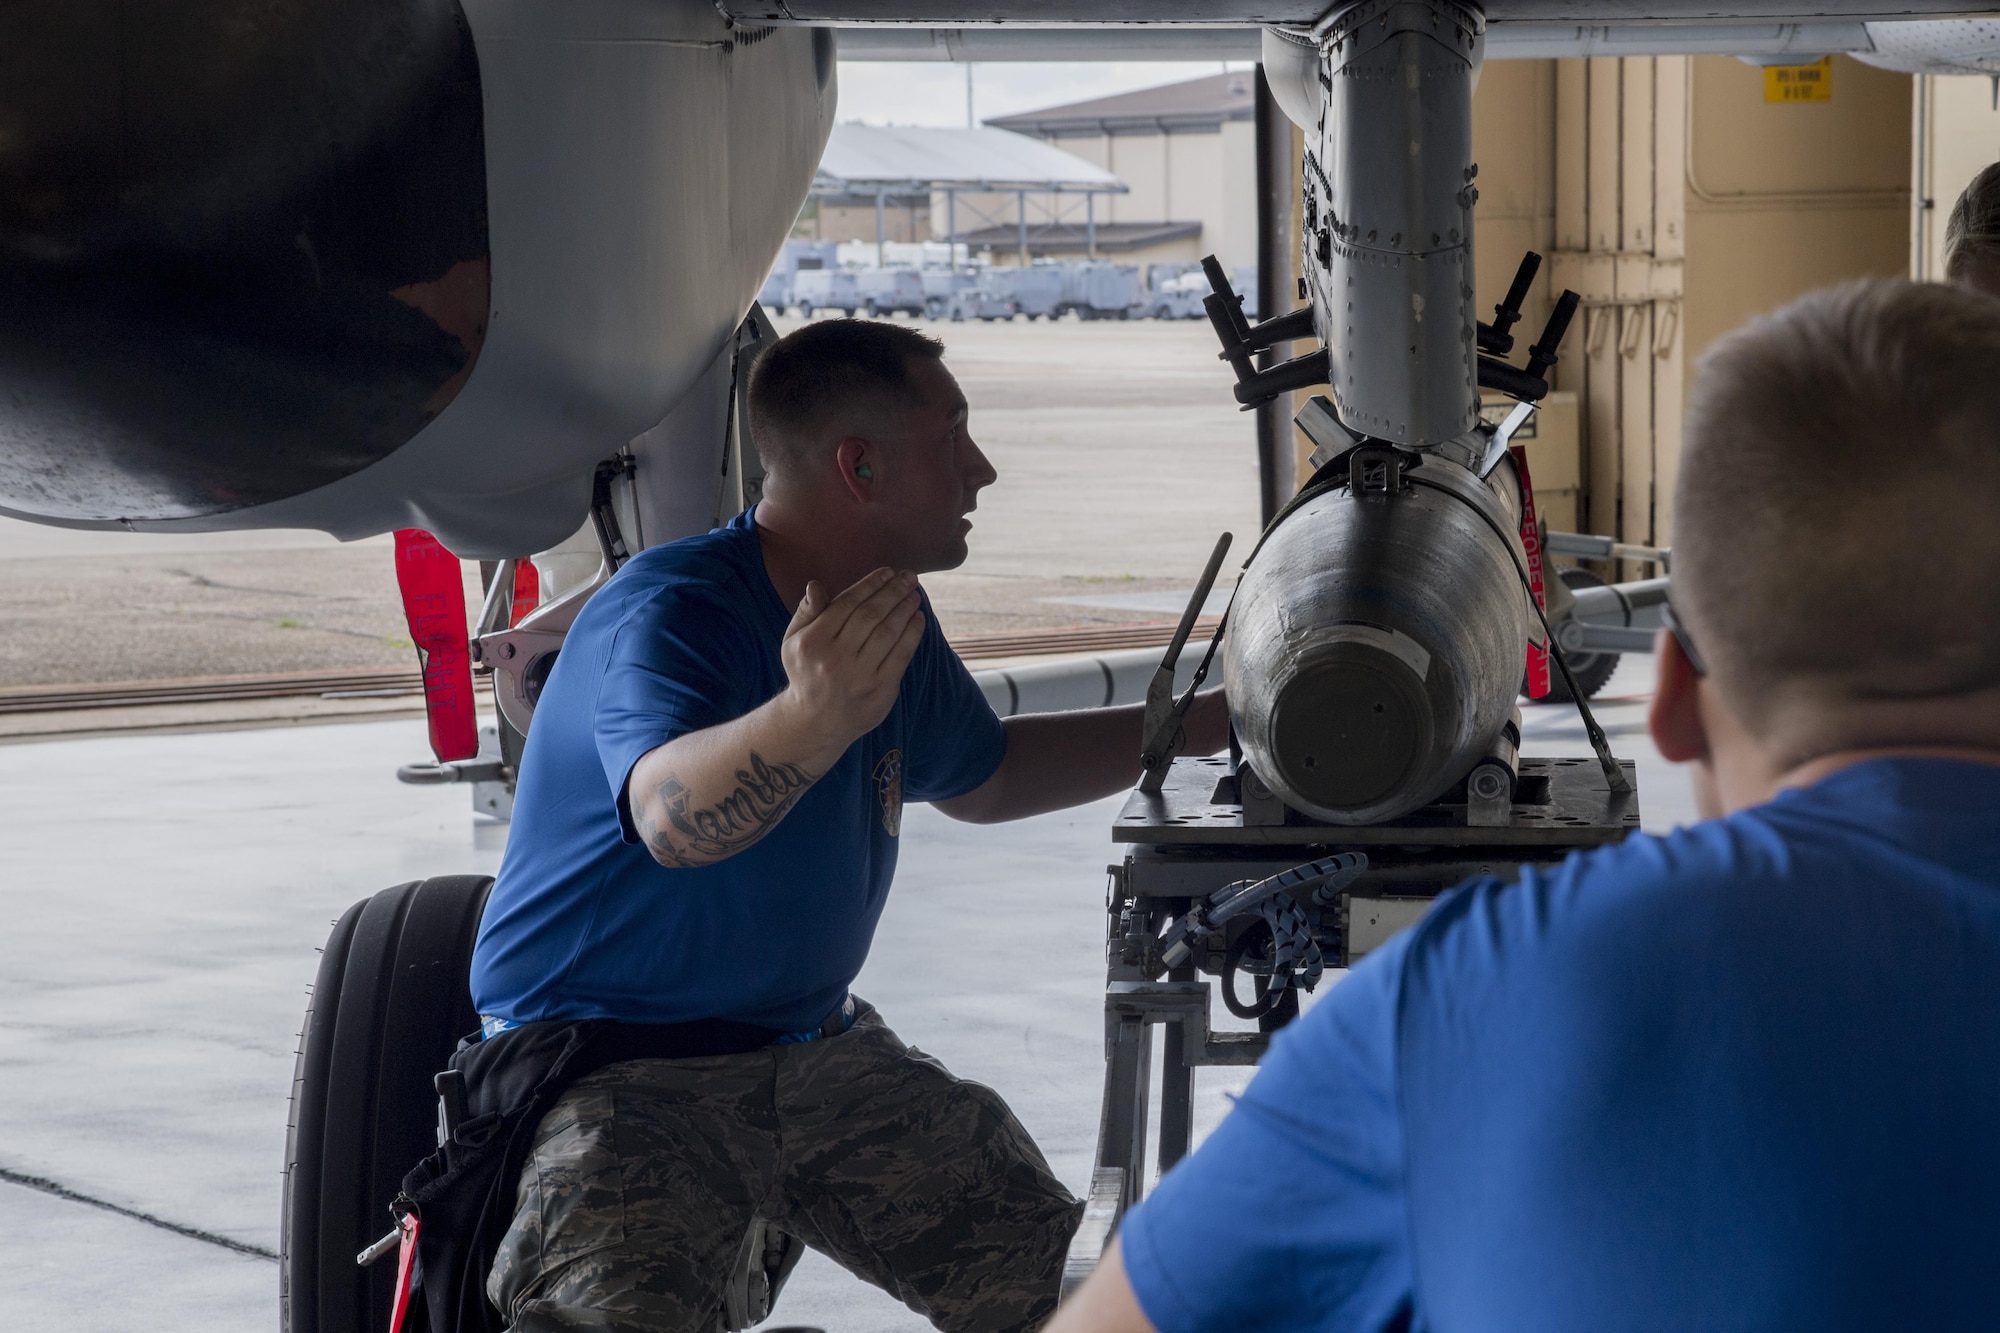 Staff Sgt. Johnathan Grieg, 74th Aircraft Maintenance Unit weapons load team chief, guides a GBU-12 joint direct attack munition to load onto an A-10C Thunderbolt II during a weapons load competition July 14, 2017, at Moody Air Force Base, Ga. Every quarter members of the 74th and 75th AMU competes in the quarterly competition that tests knowledge, dress and appearance, and speed of loading a GBU-12 joint direct attack munition and AIM-9 Sidewinder. (U.S. Air Force photo by Staff Sgt. Eric Summers Jr.)